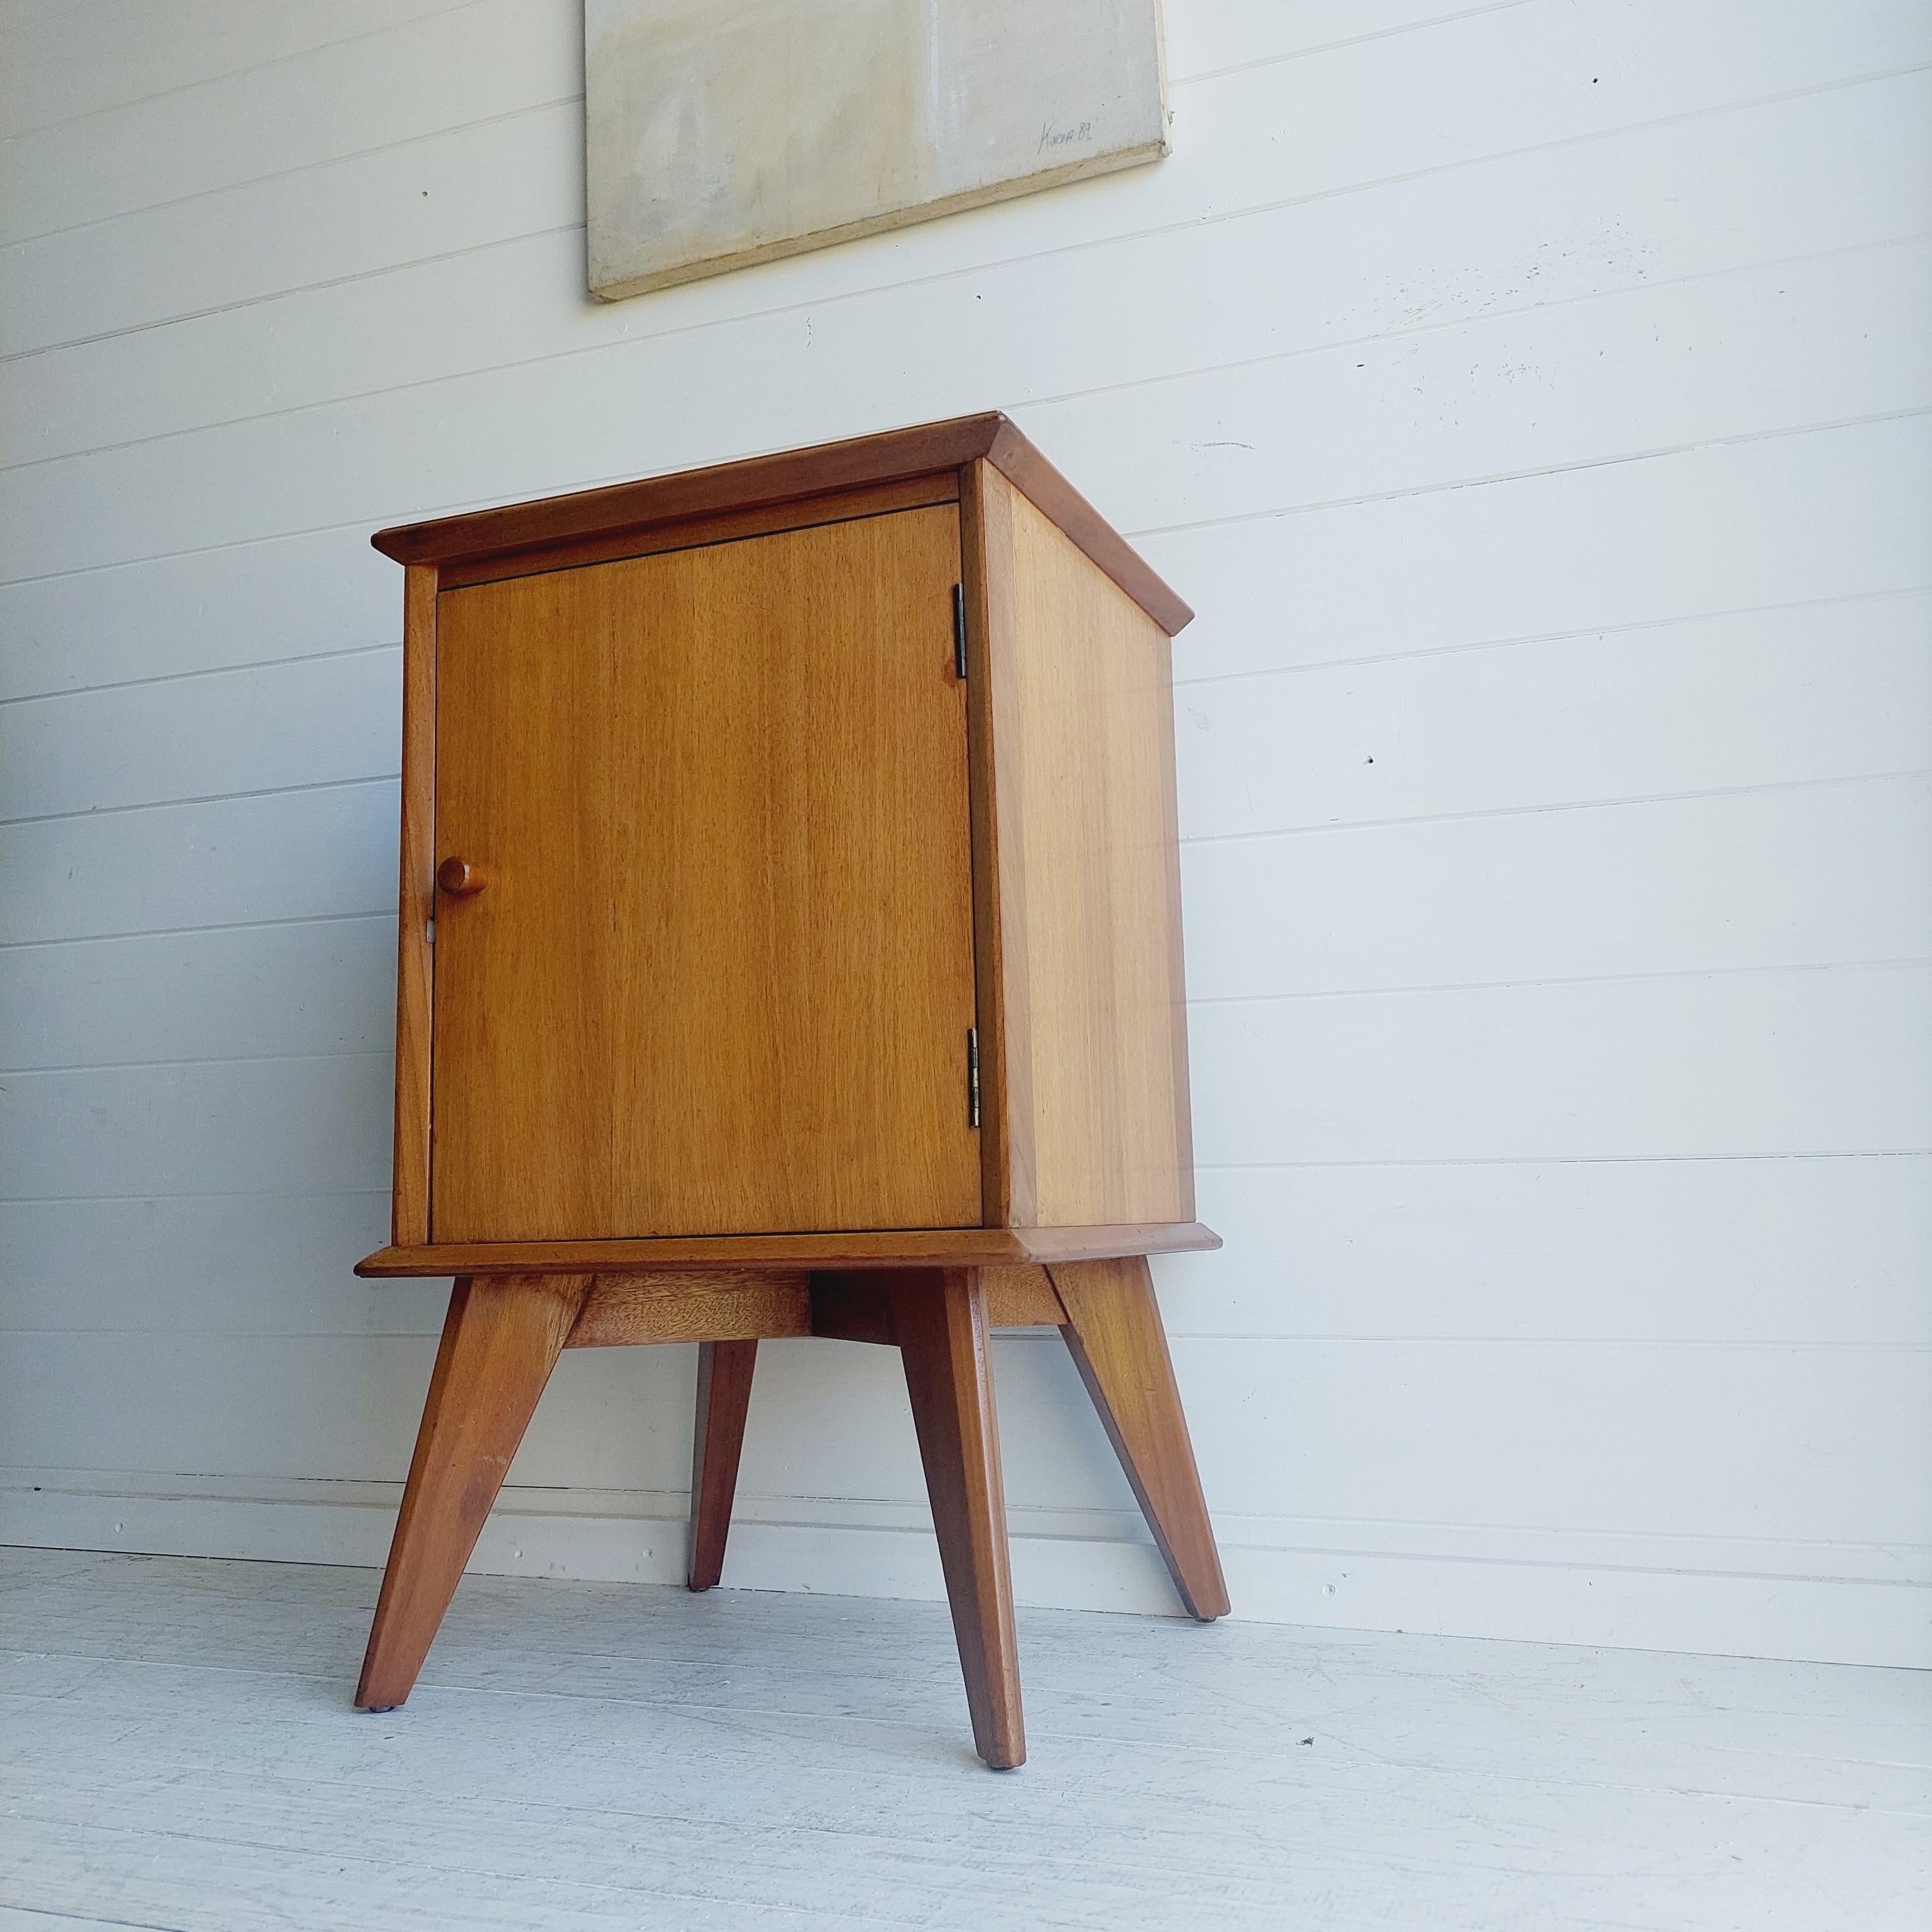 British Mid Century Retro Walnut Bedside Cabinet nightsand  by Alfred Cox Vintage 1950’s